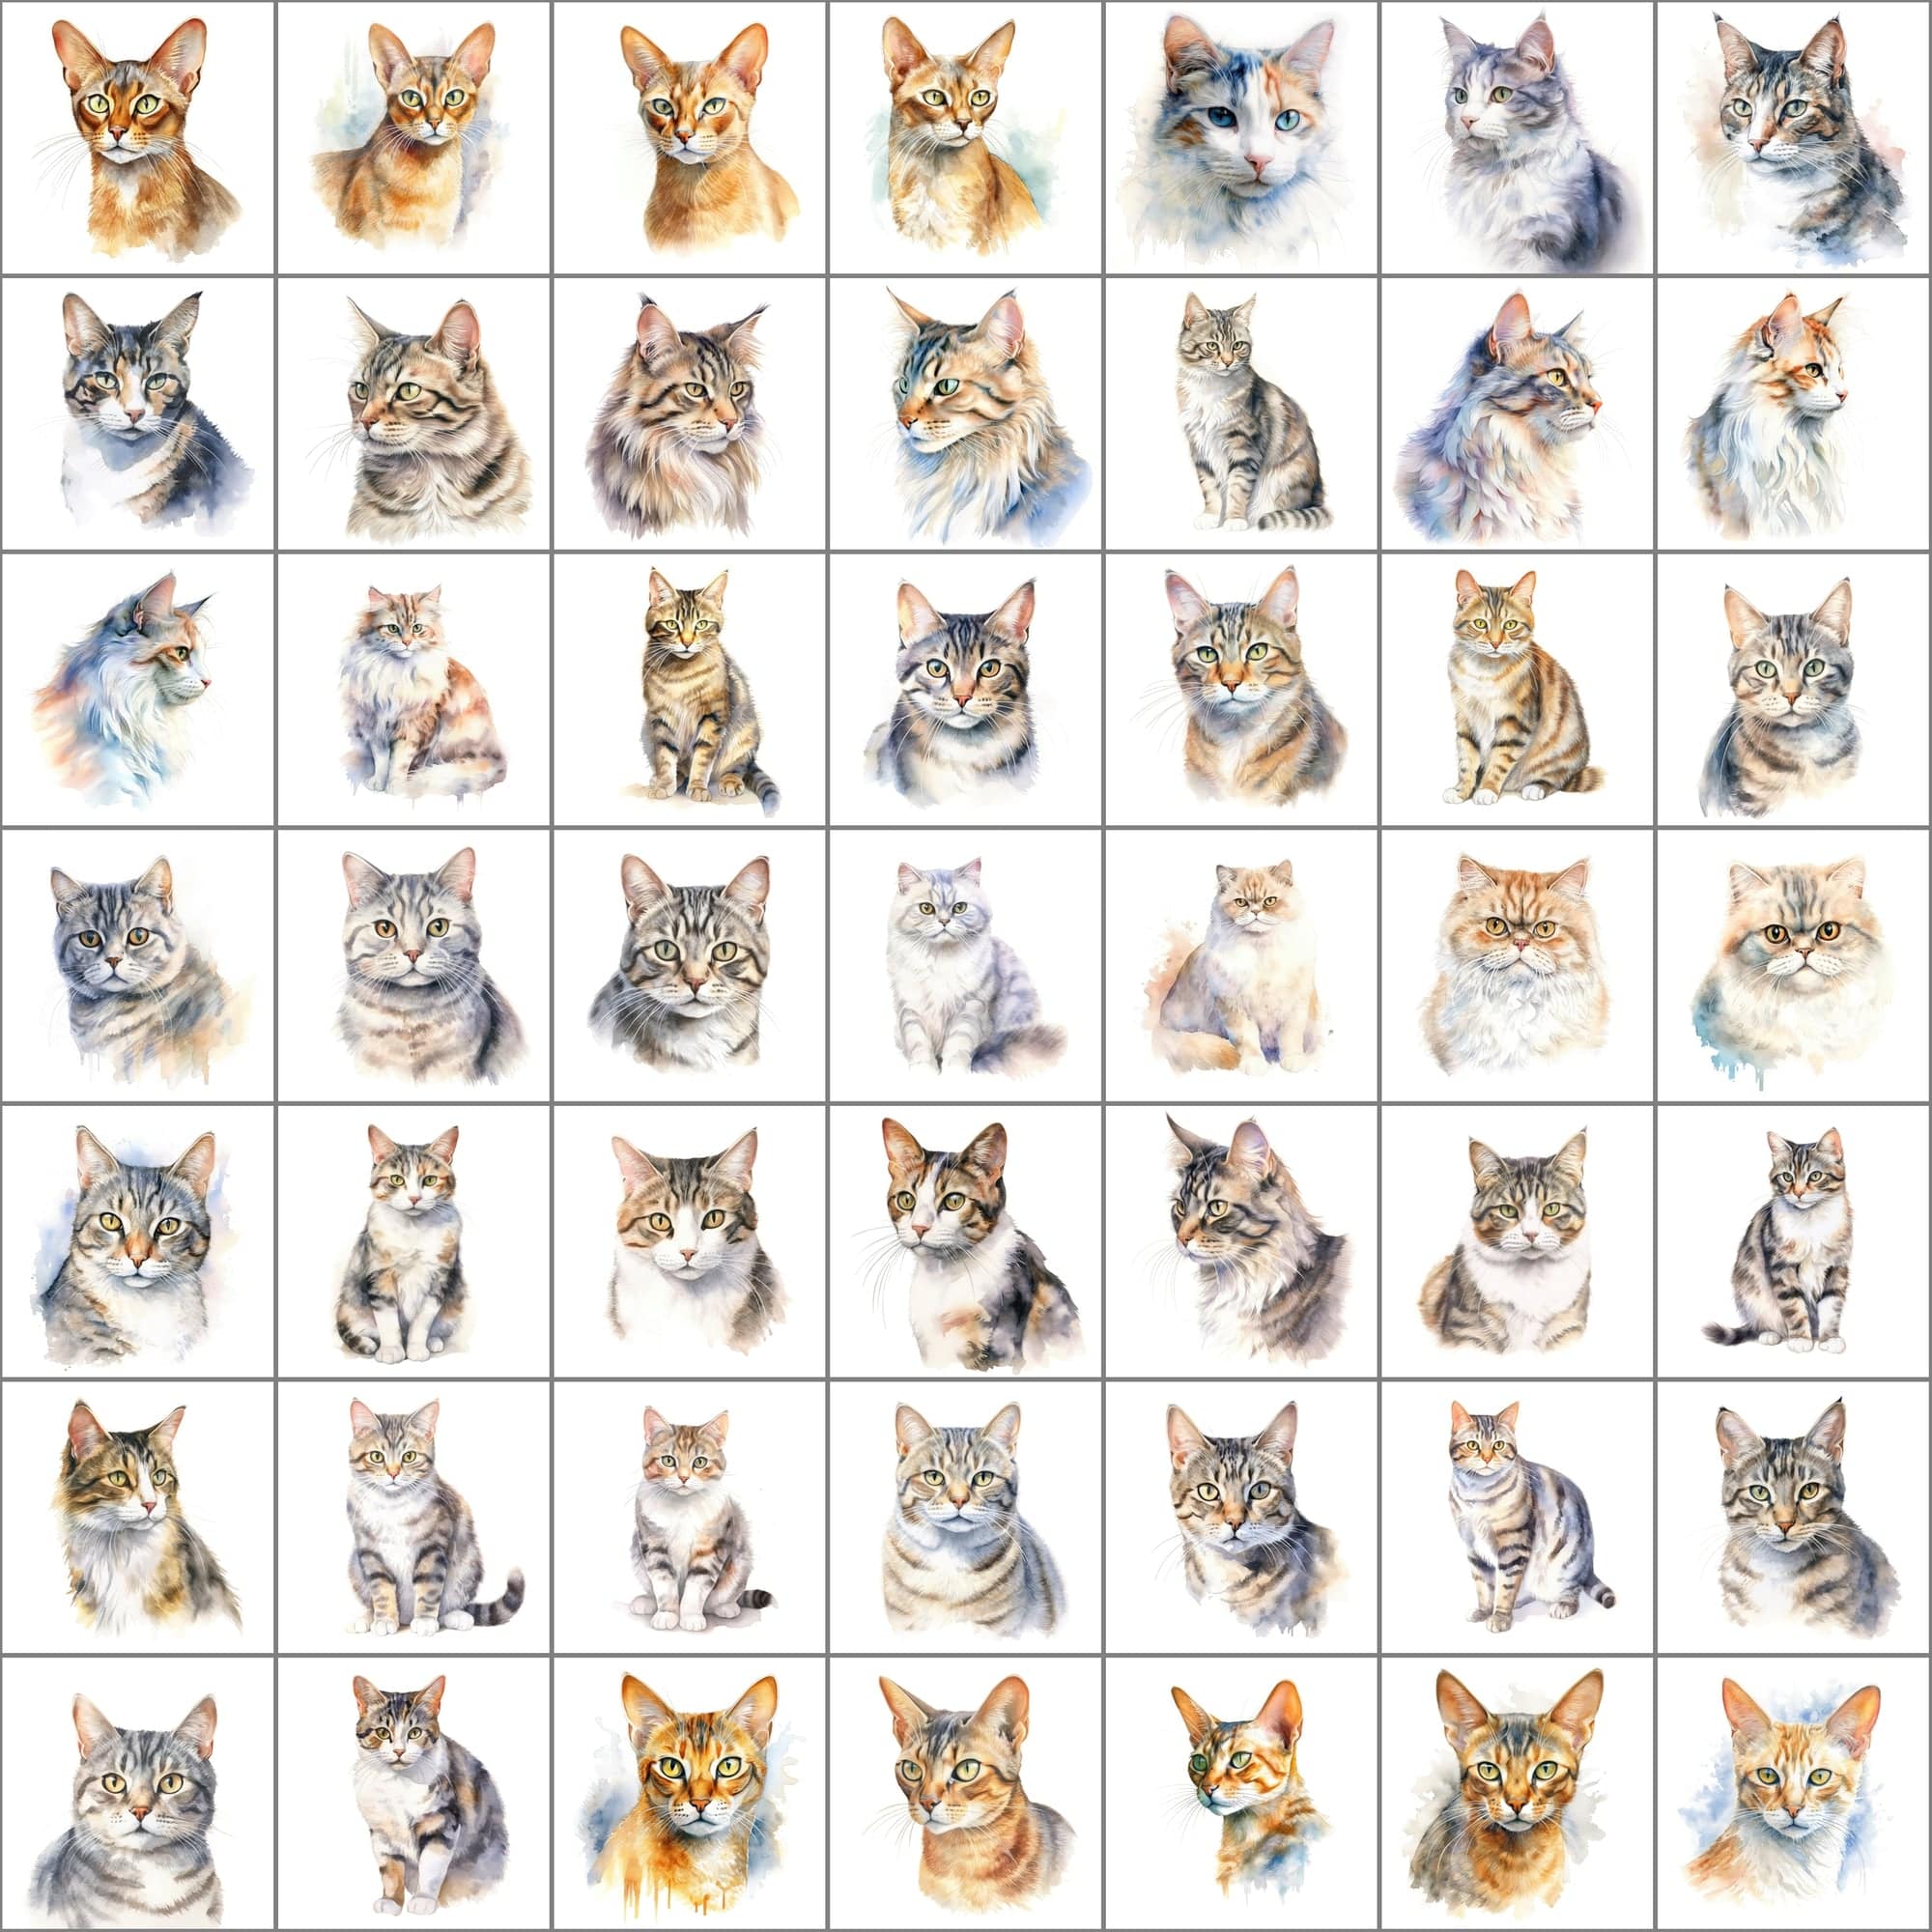 Exquisite Collection of 550 Watercolor Feline Breed Images - Inclusive of Commercial Rights Digital Download Sumobundle